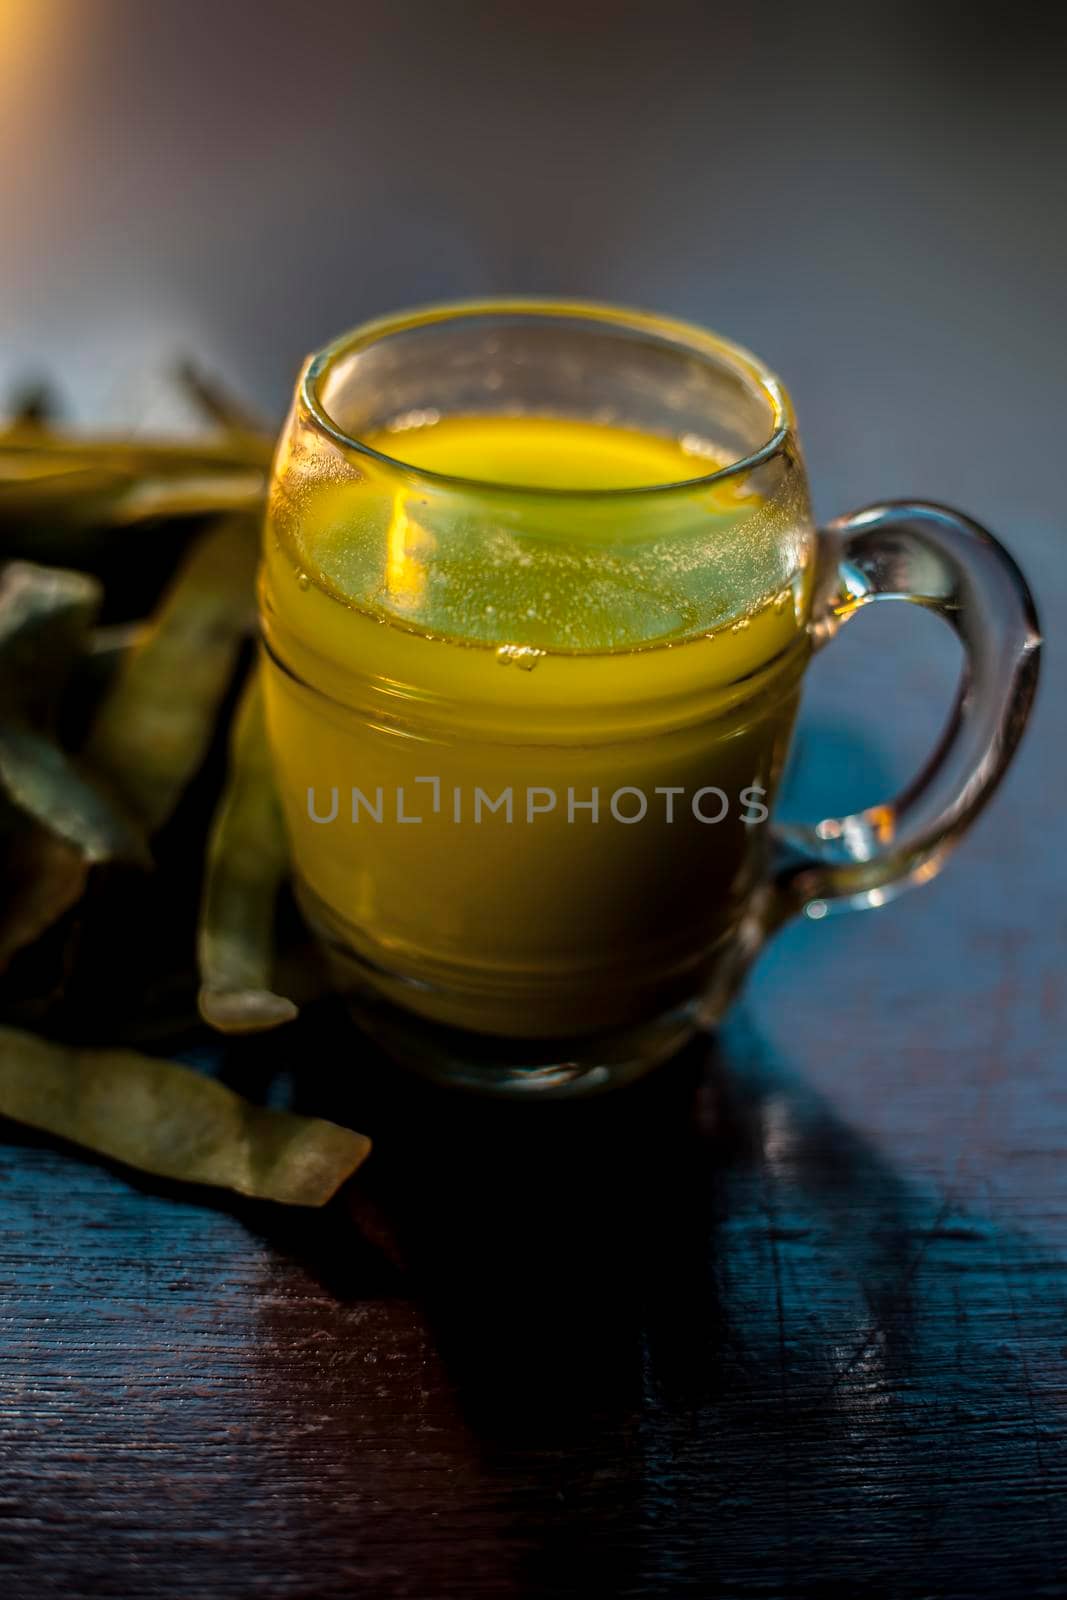 Shot of healthy nutritious organic Sponge gourd or luffa juice in a glass mug along ith some raw sponge gourd with it.